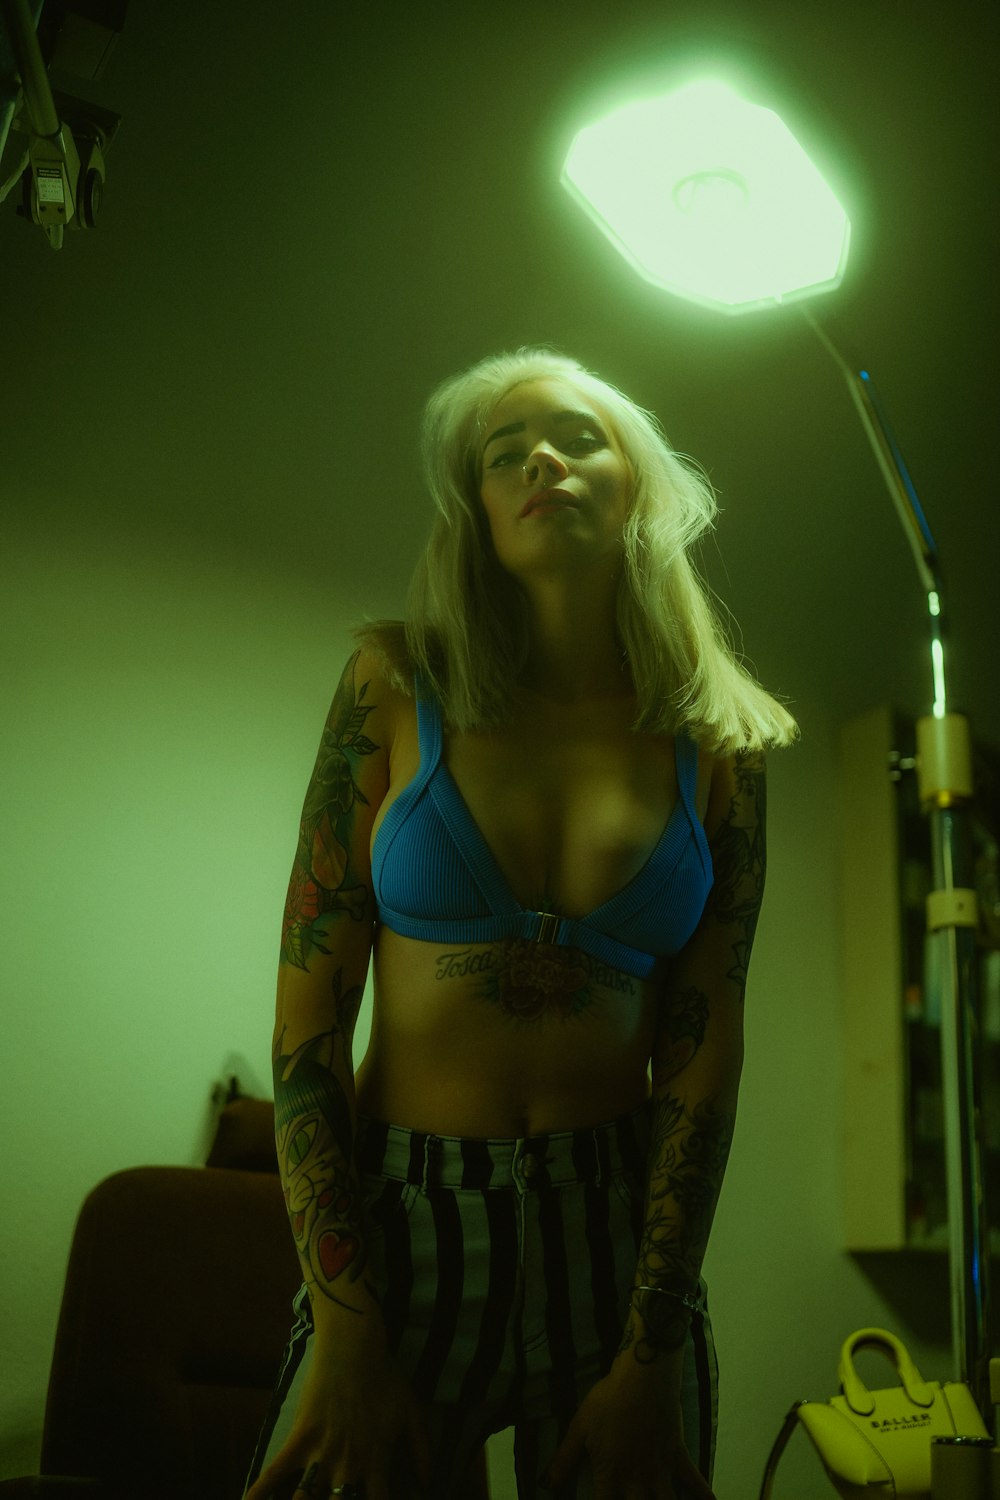 a woman with tattoos standing in a room